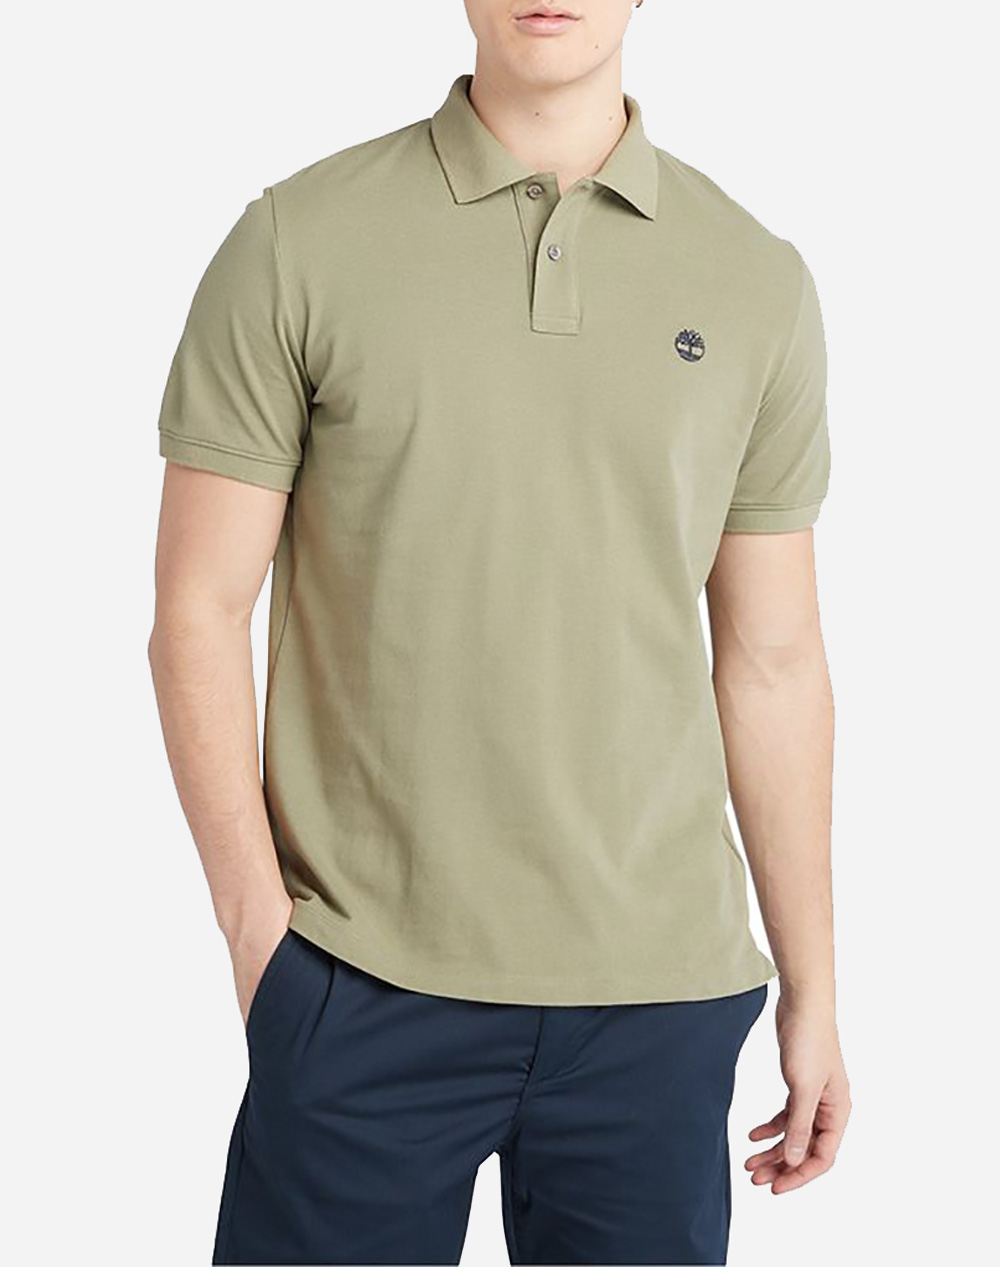 TIMBERLAND Pique Short Sleeve Polo TB0A26N4-590 Olive 3820ATIMB3400107_XR22707